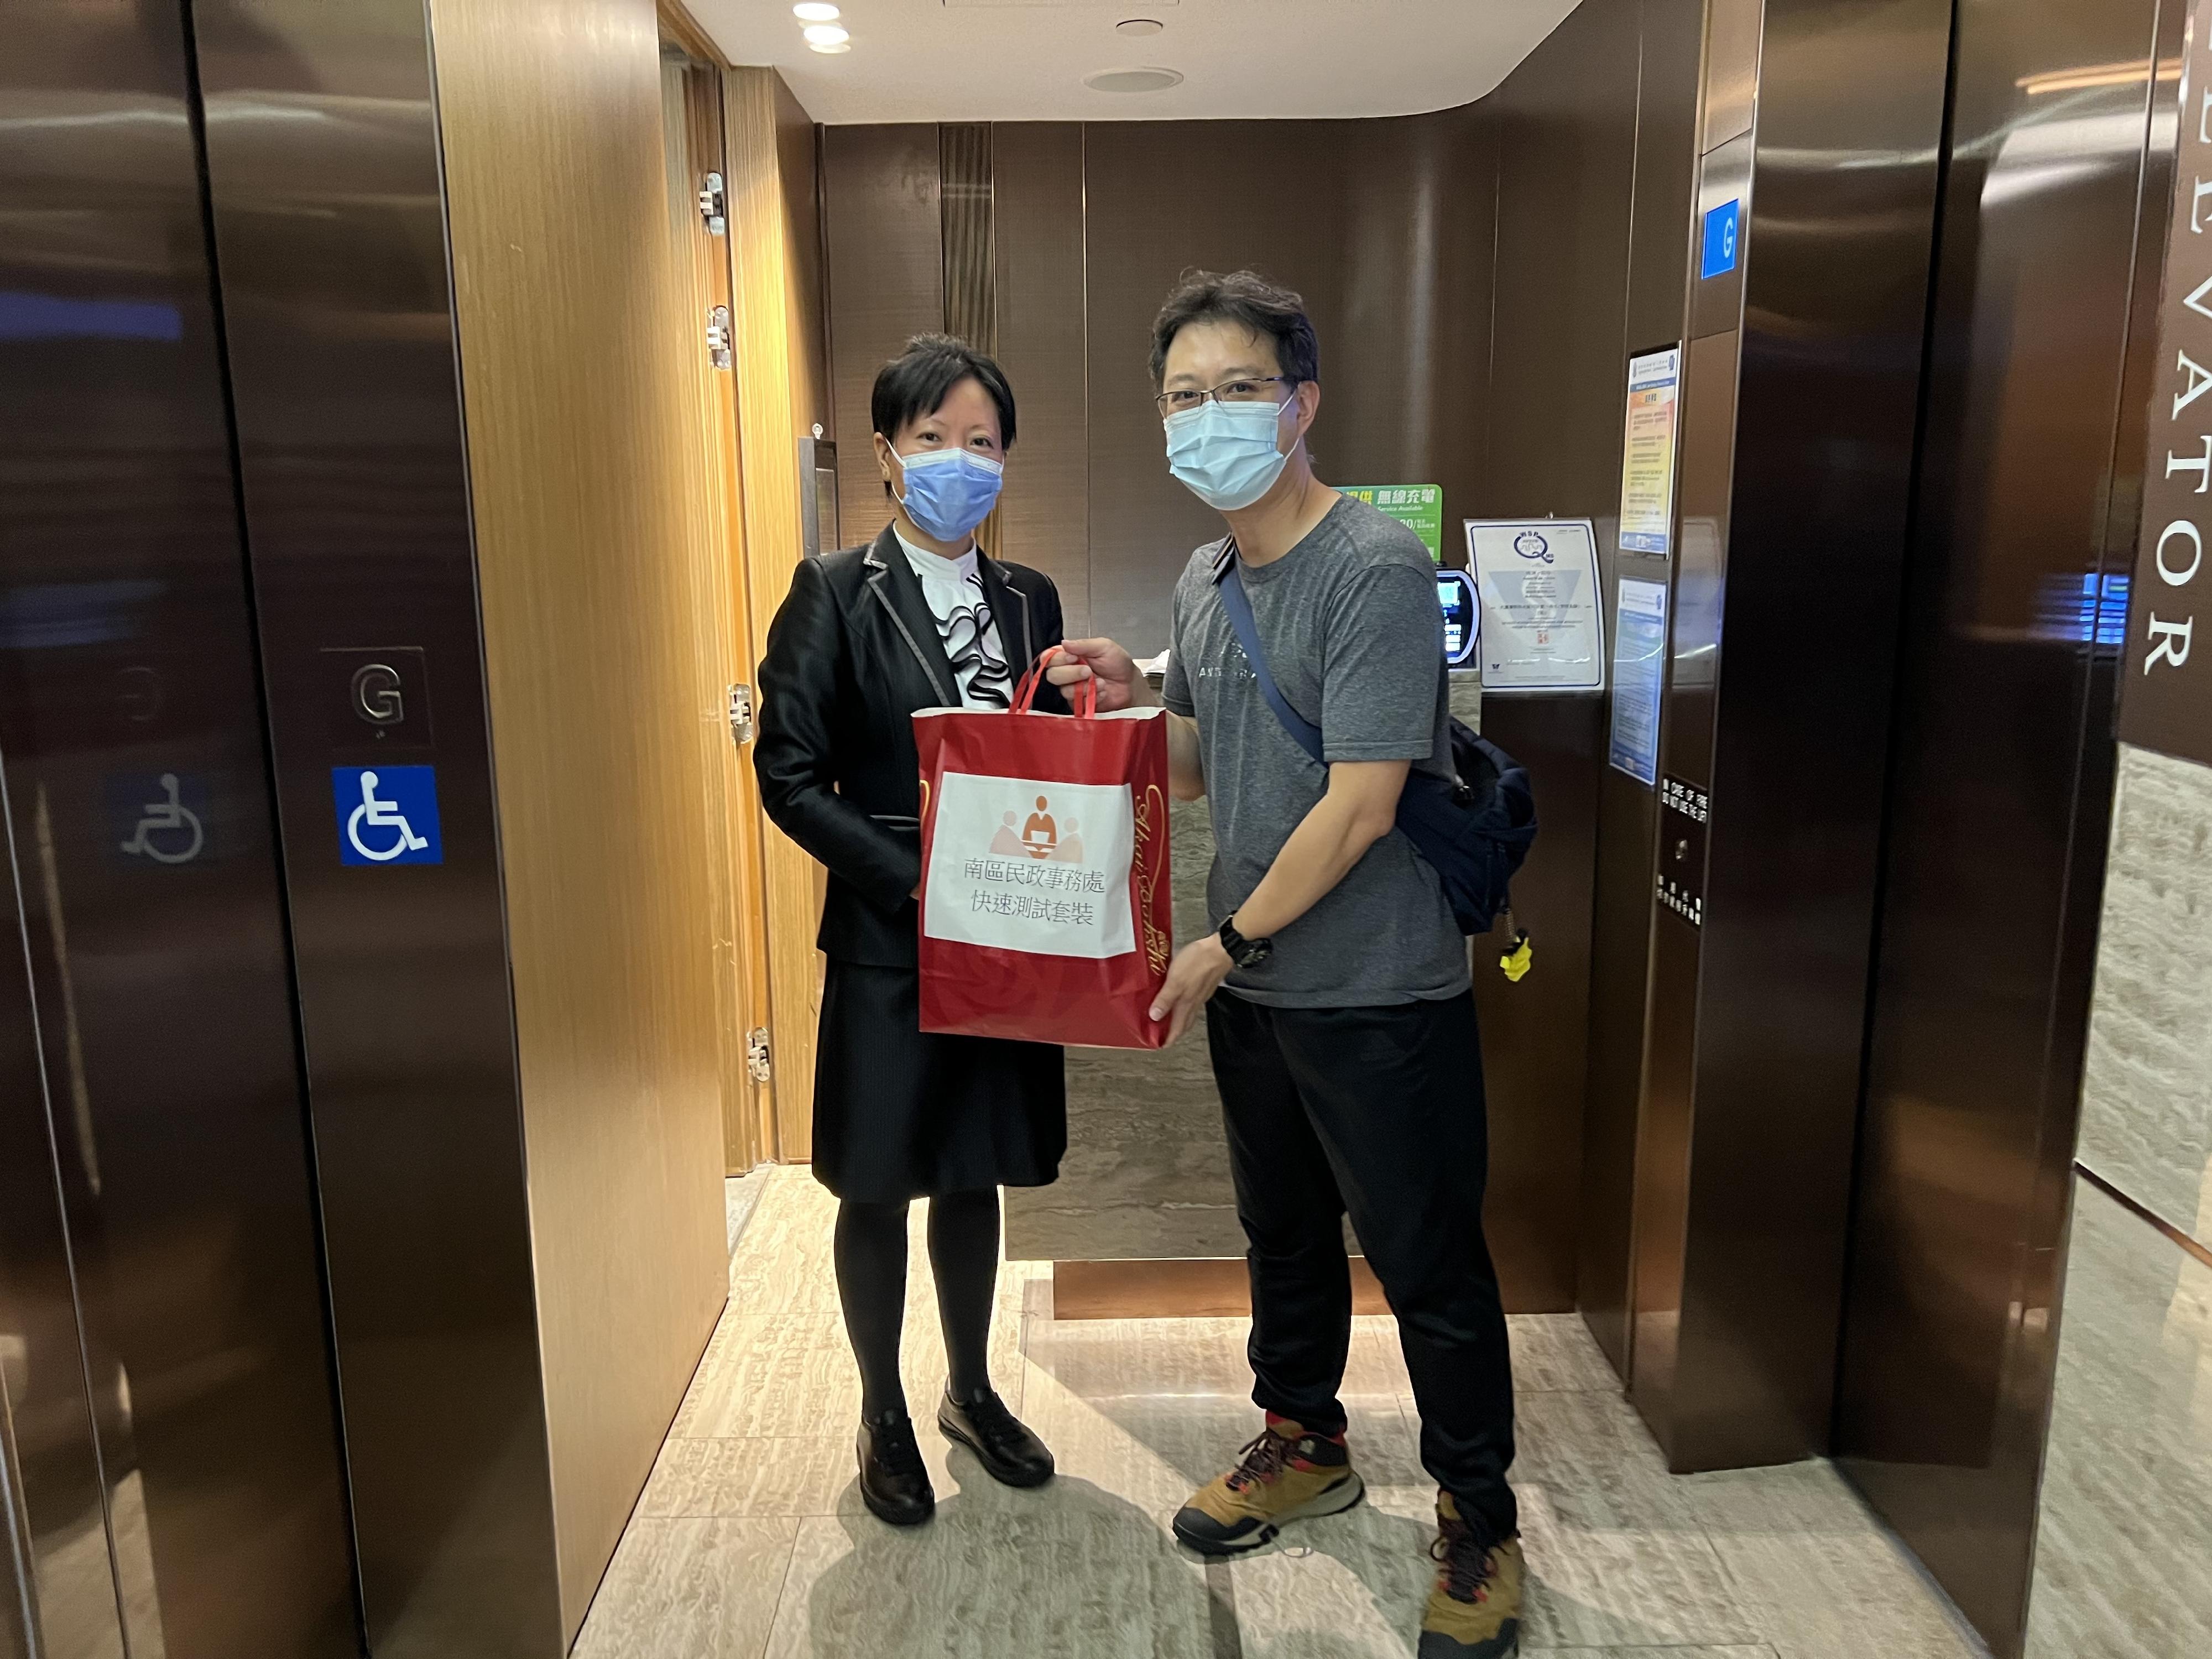 The Southern District Office today (May 10) distributed COVID-19 rapid test kits to households, cleansing workers and property management staff living and working in South Walk･Aura for voluntary testing through the property management company.